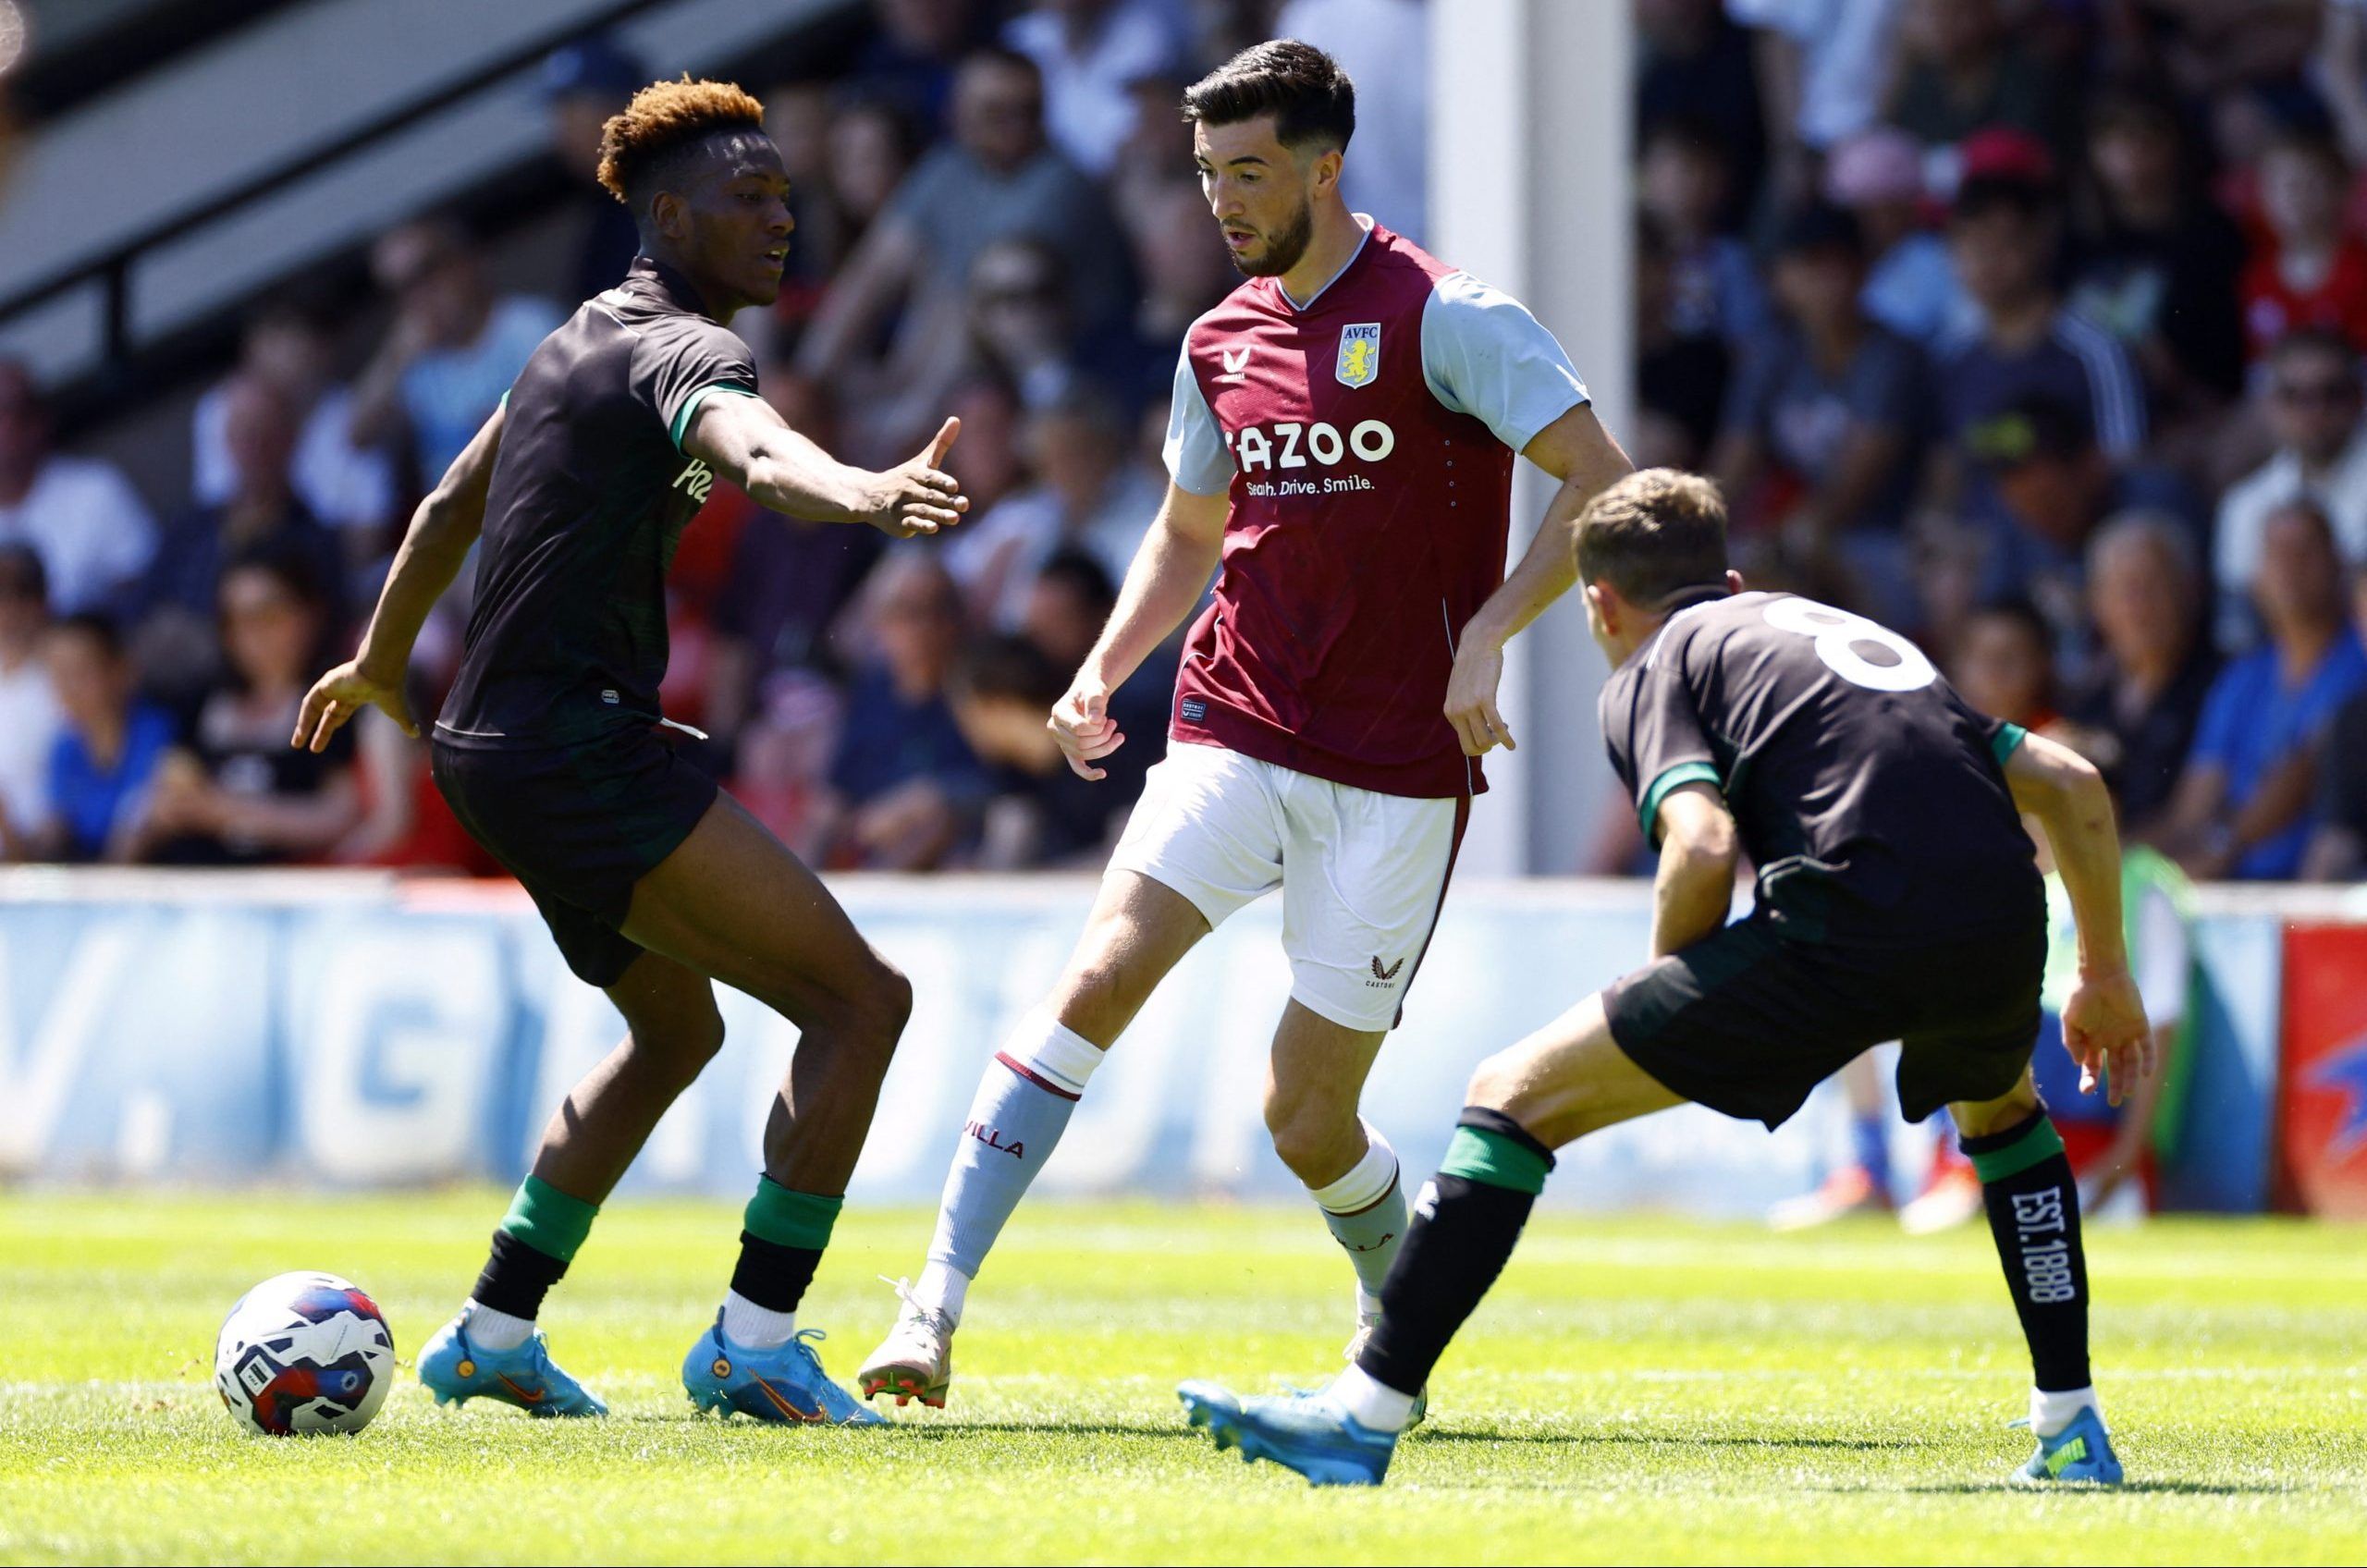 Soccer Football - Pre Season Friendly - Walsall v Aston Villa - Bescot Stadium, Walsall, Britain - July 9, 2022 Aston Villa's Finn Azaz in action with Walsall's Timmy Abraham and Liam Kinsella Action Images via Reuters/Andrew Boyers